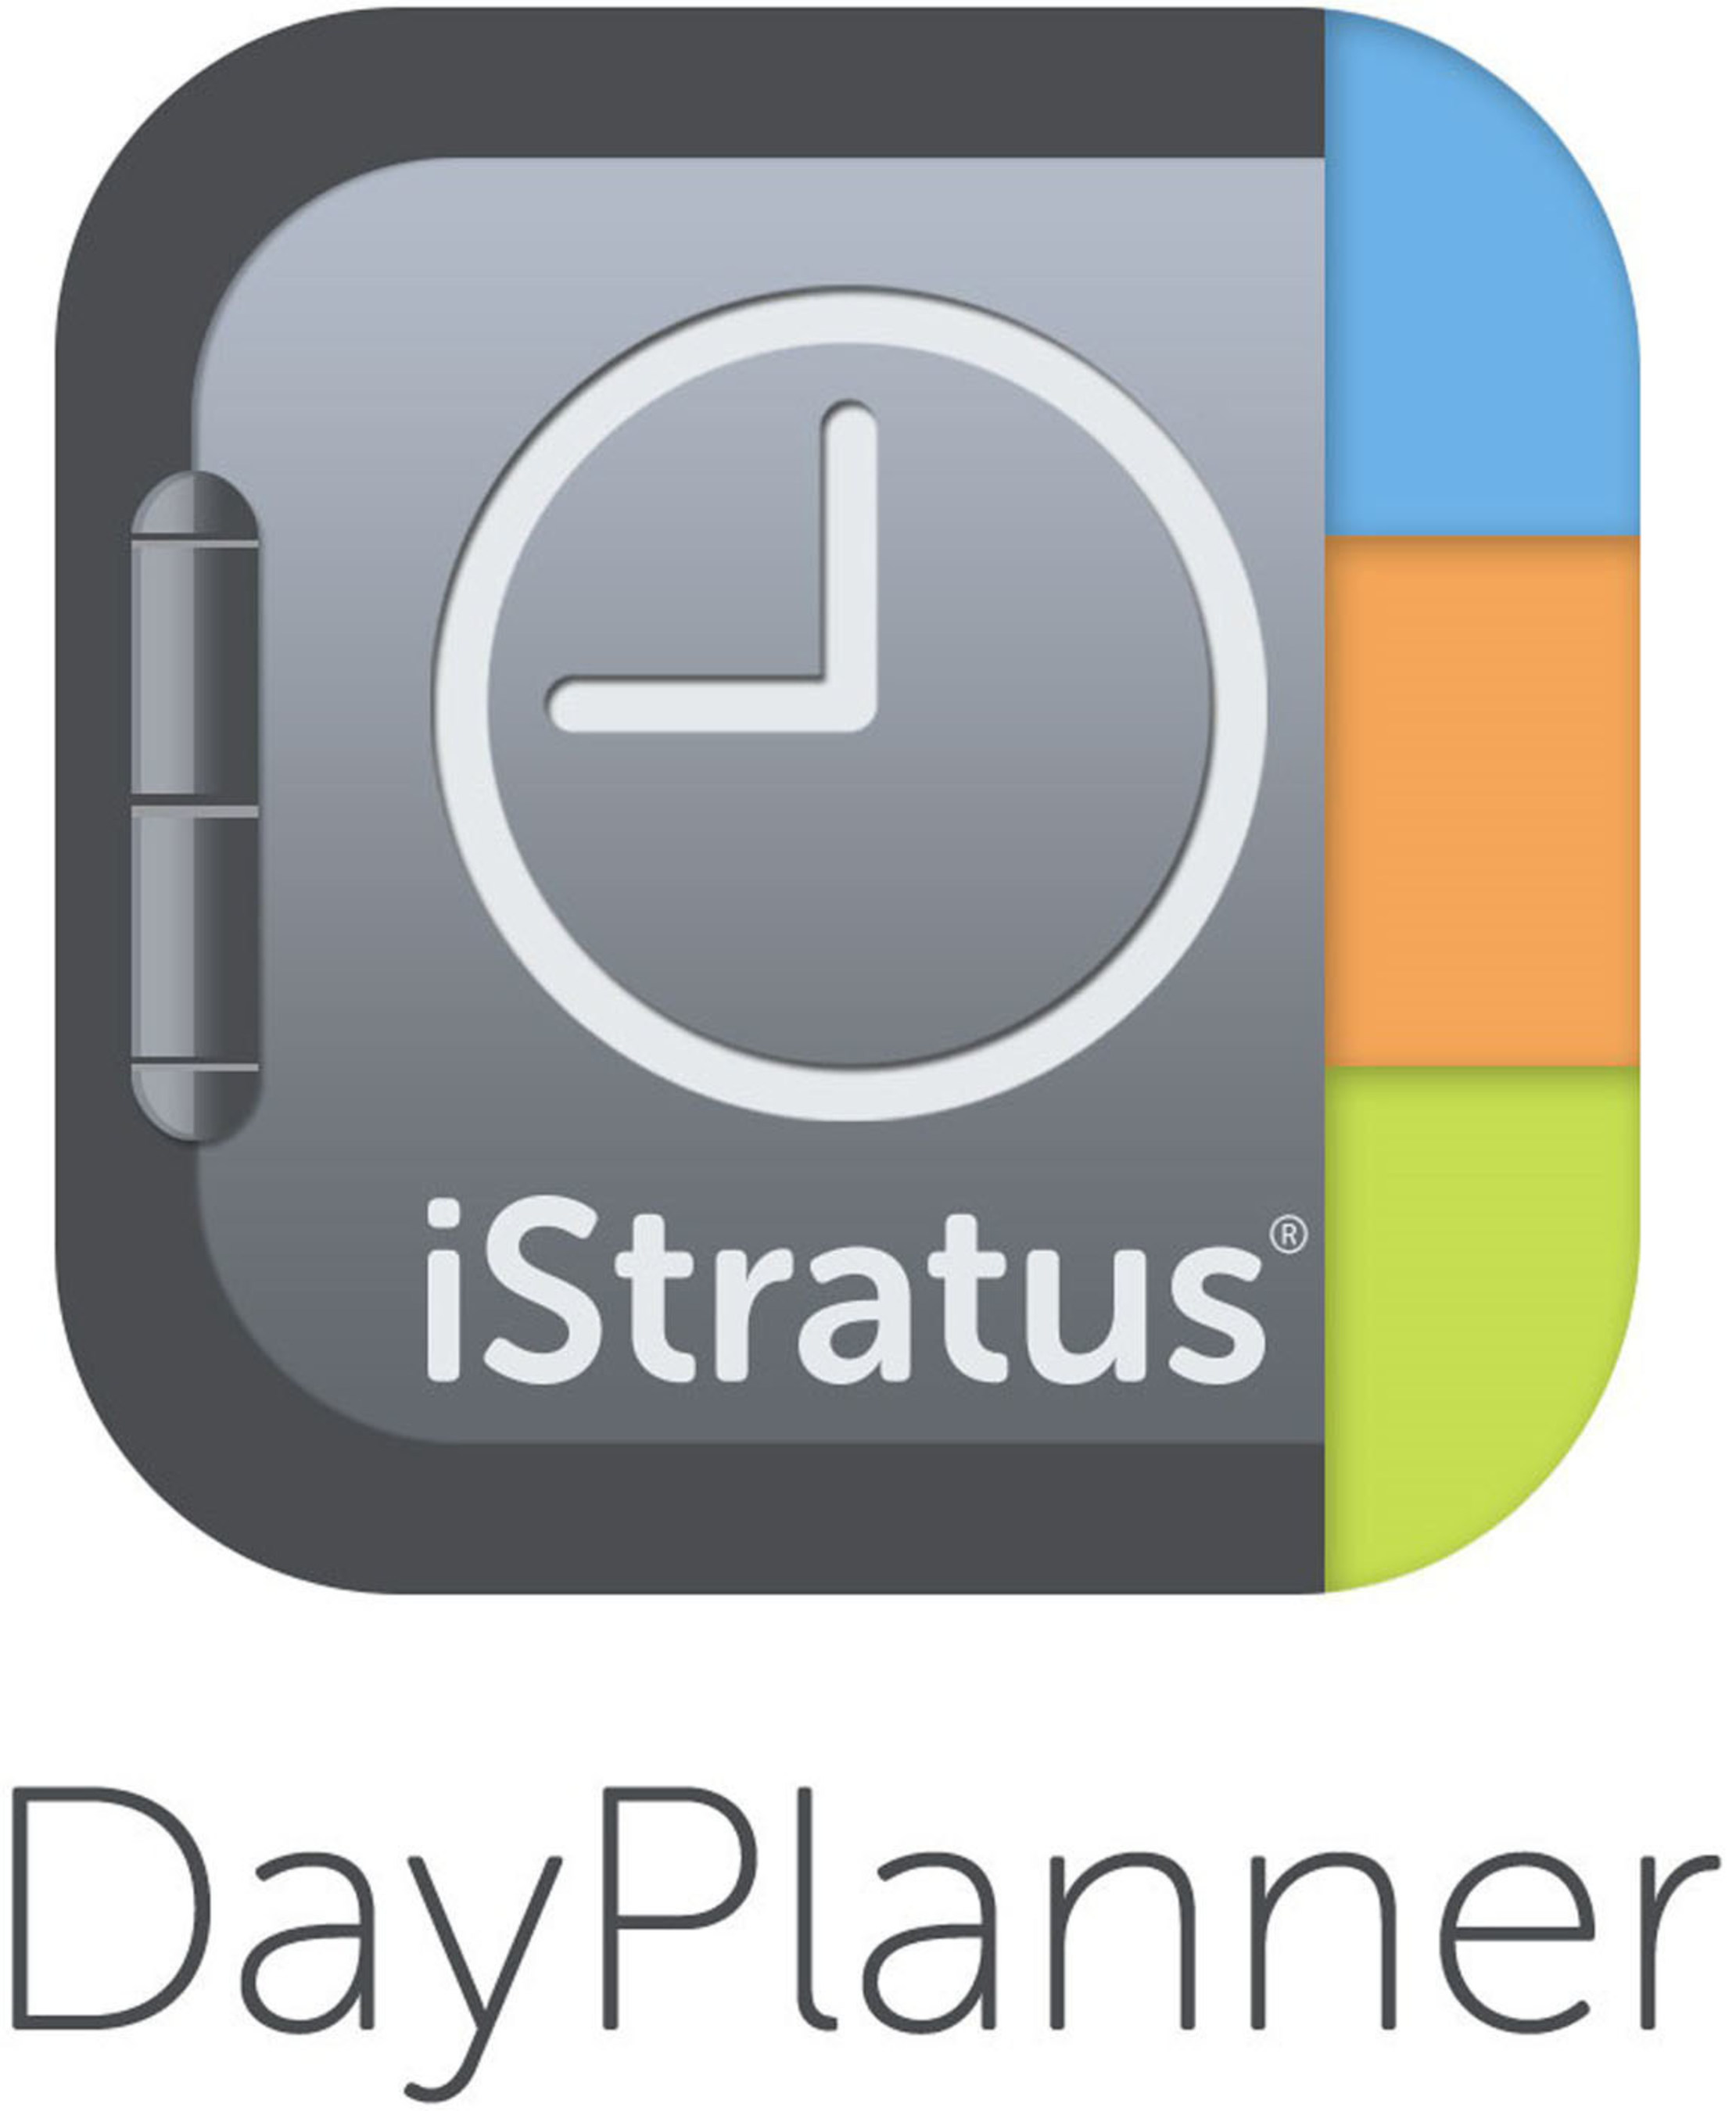 Your mobile day planner that gathers, connects and stores everything in your life. www.iStratus.com